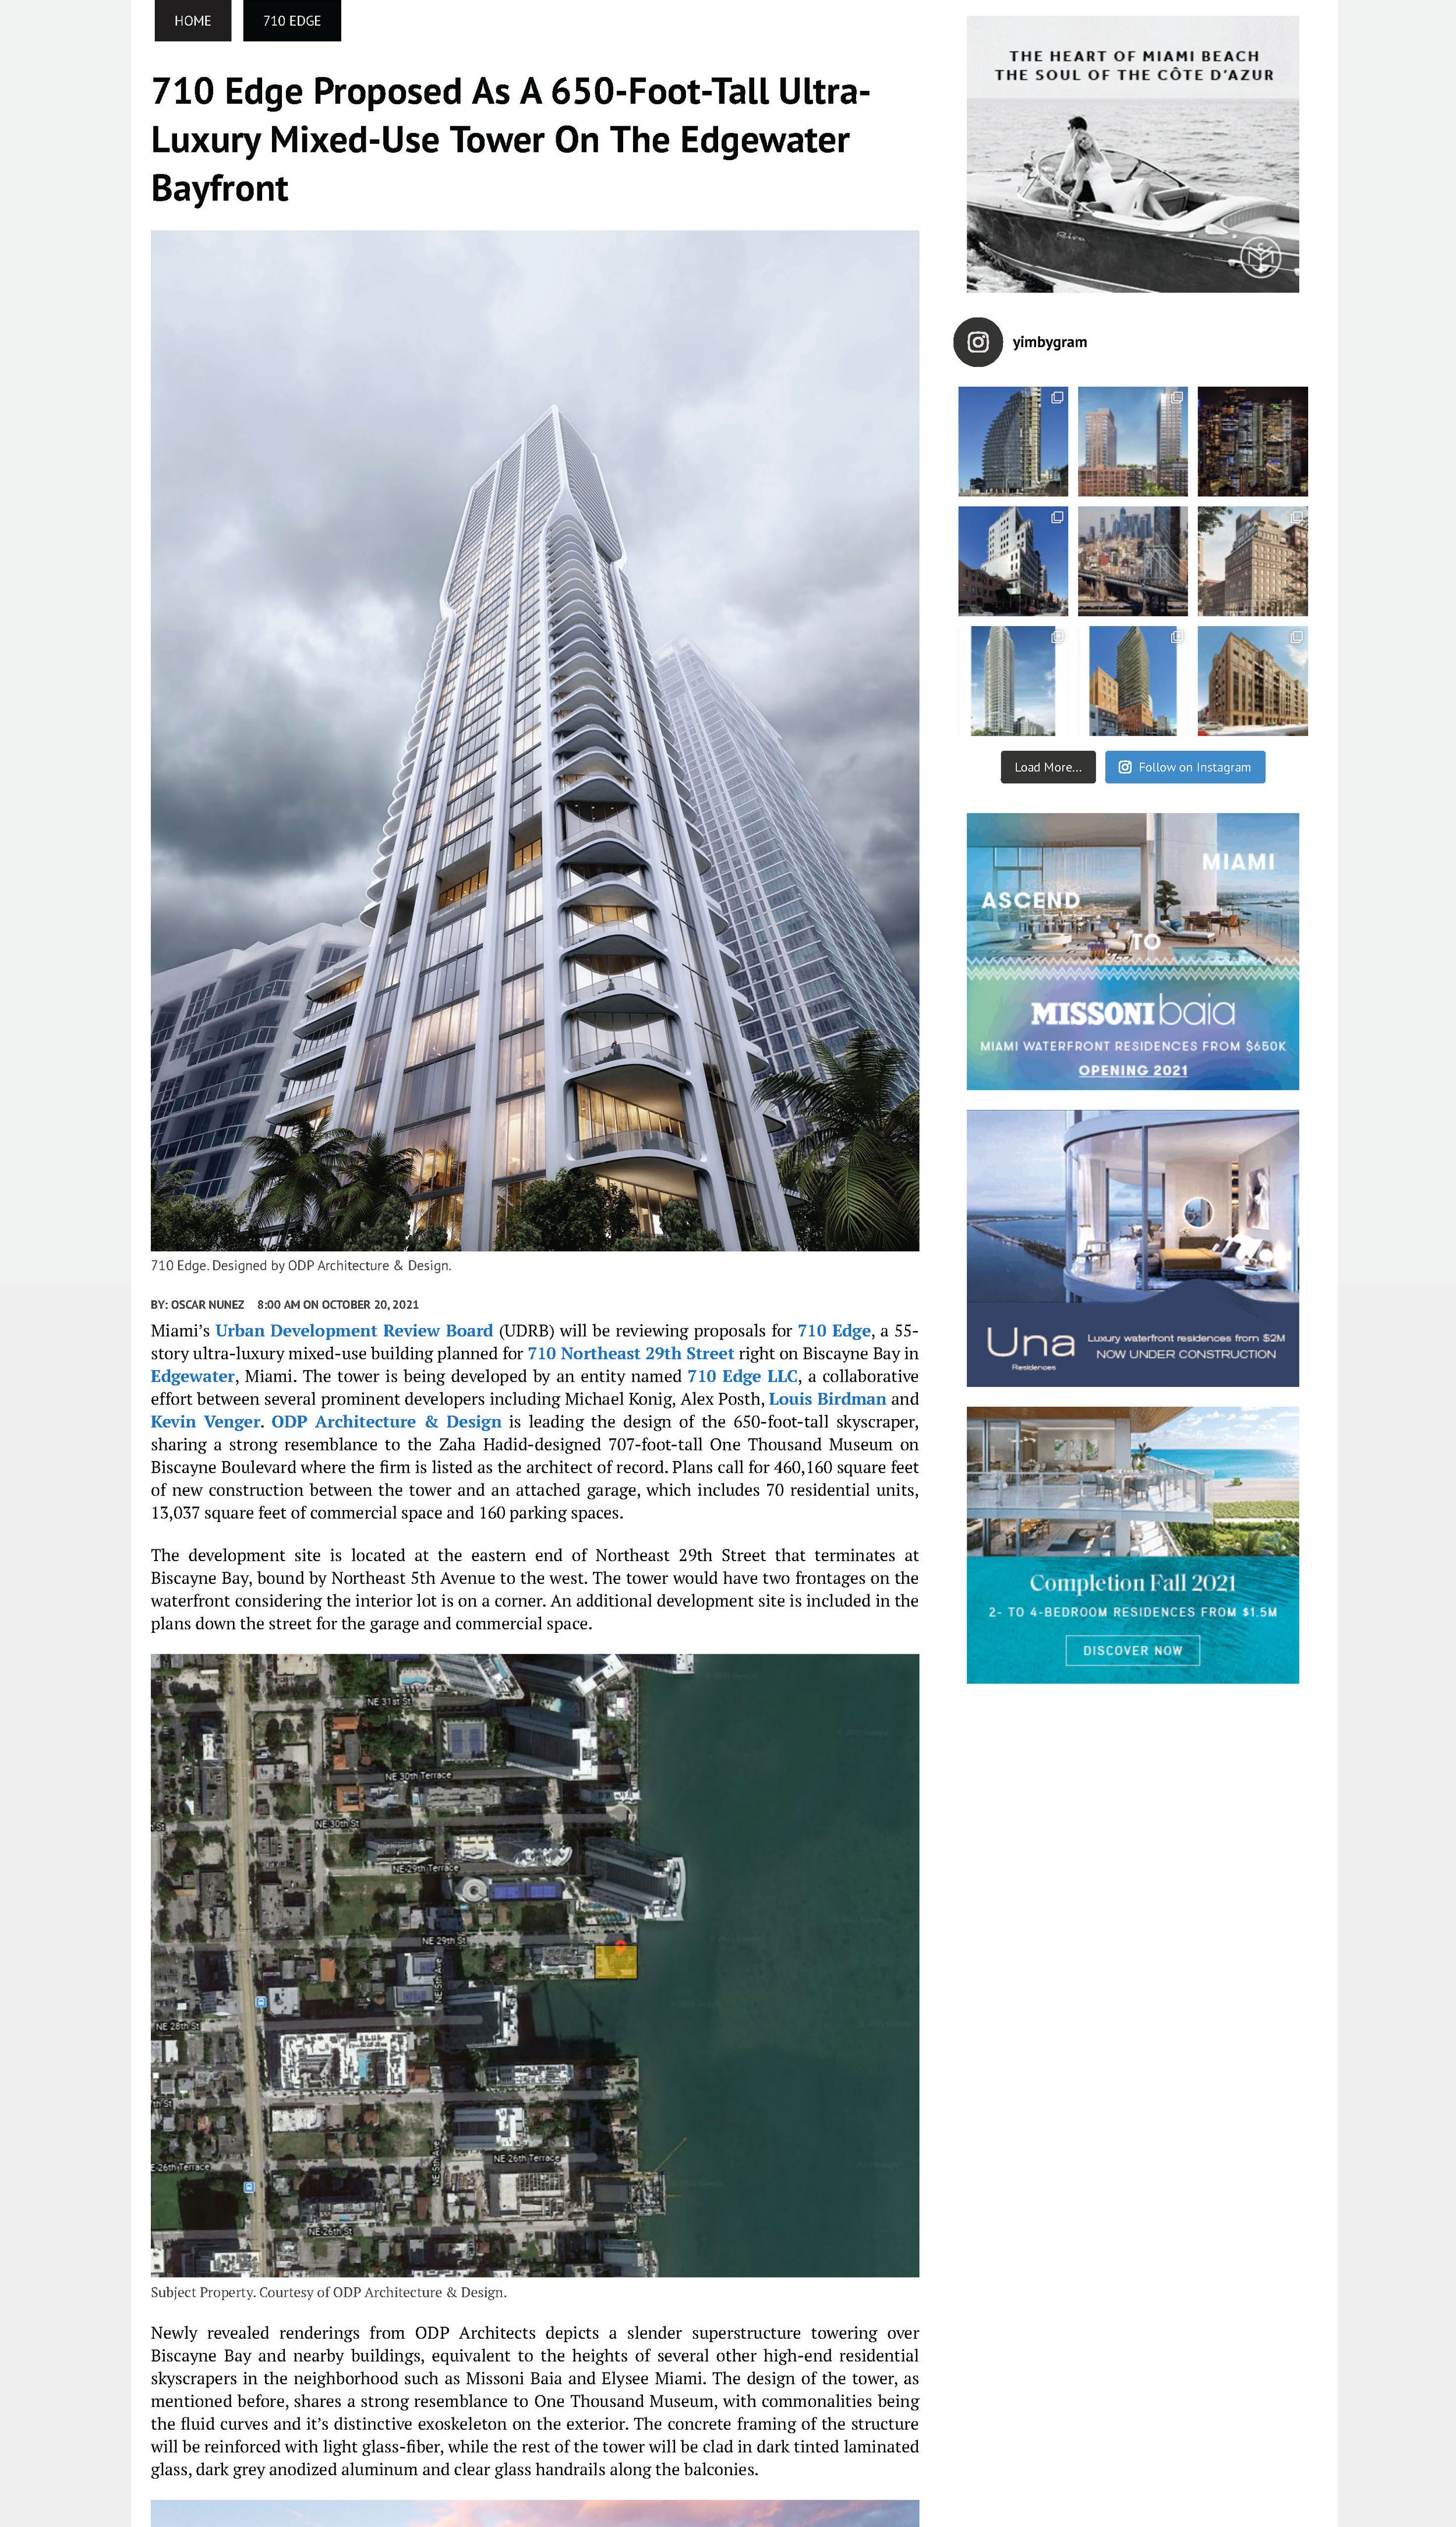 710 Edge Proposed As A 650-Foot-Tall Ultra-Luxury Mixed-Use Tower On The Edgewater Bayfront - Florid.jpg